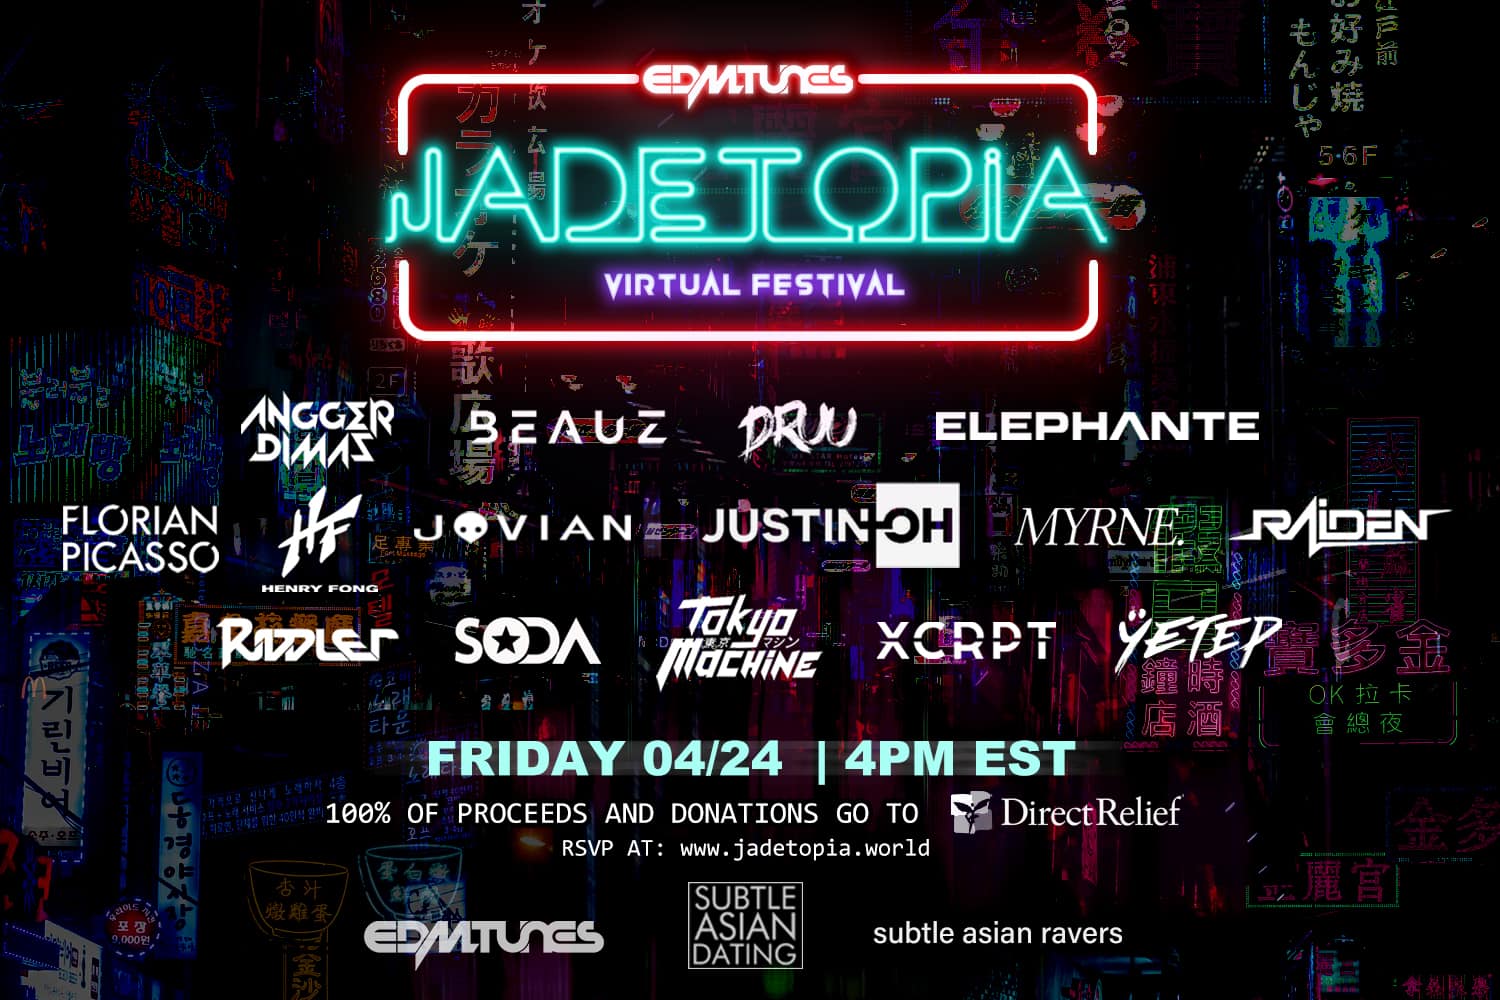 VIRTUAL FESTIVAL JADETOPIA LAUNCHES FOR COVID-19 RELIEF WITH FULL ASIAN LINEUP FT. FLORIAN PICASSO, ELEPHANTE AND MORE